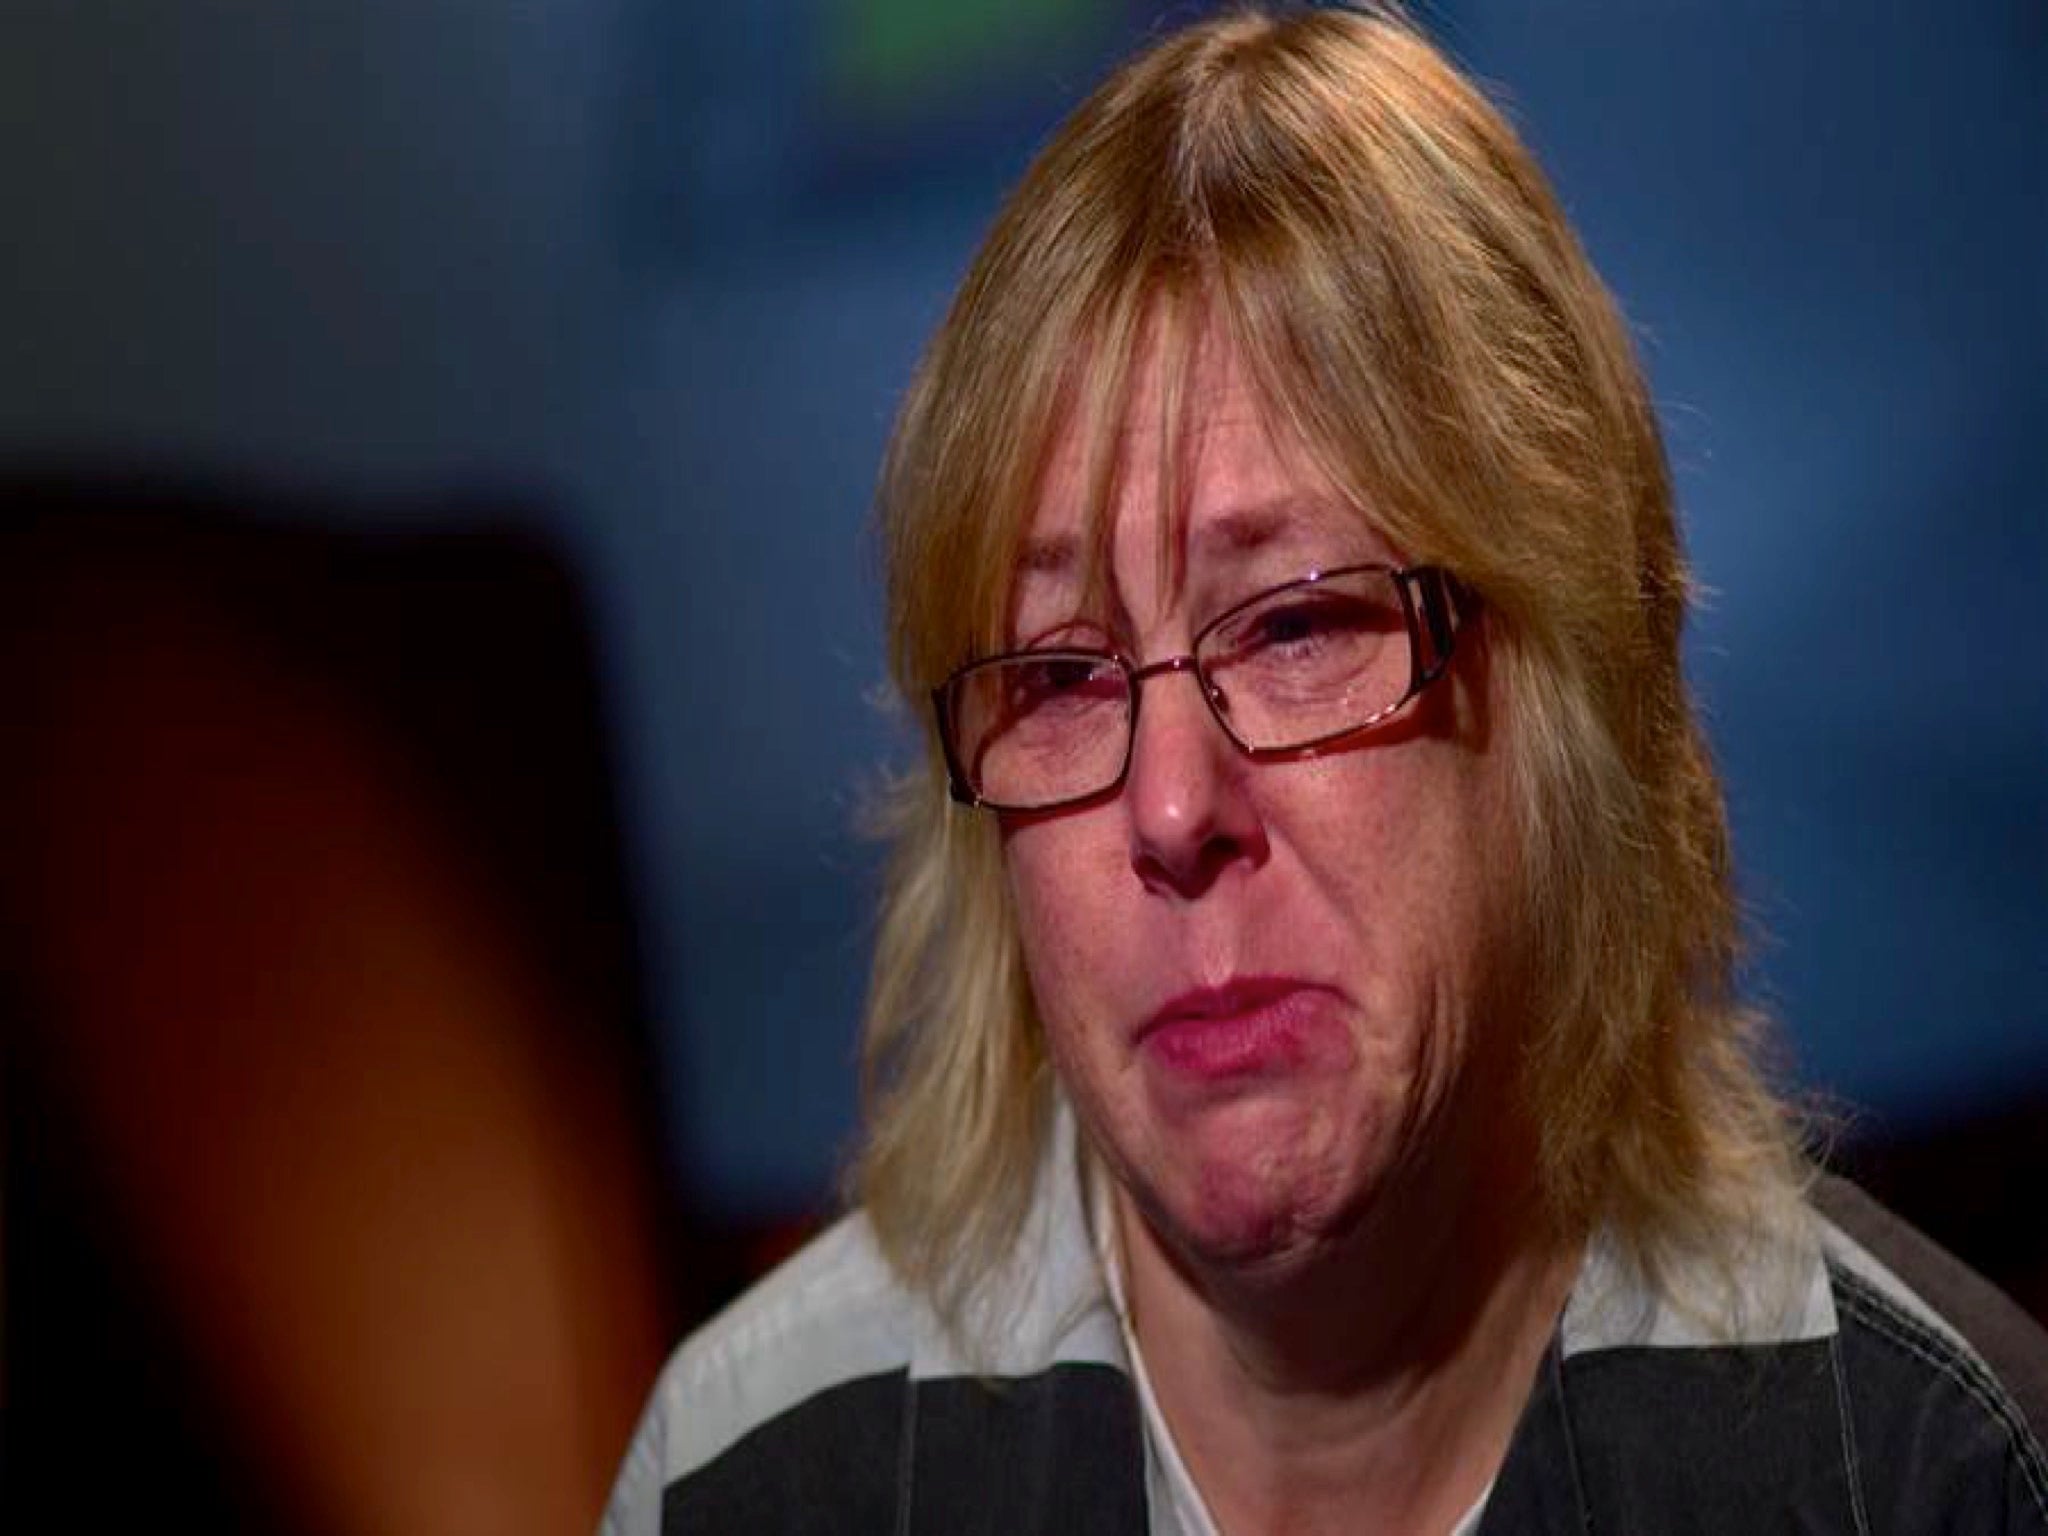 Joyce Mitchell is to be sentenced later this year